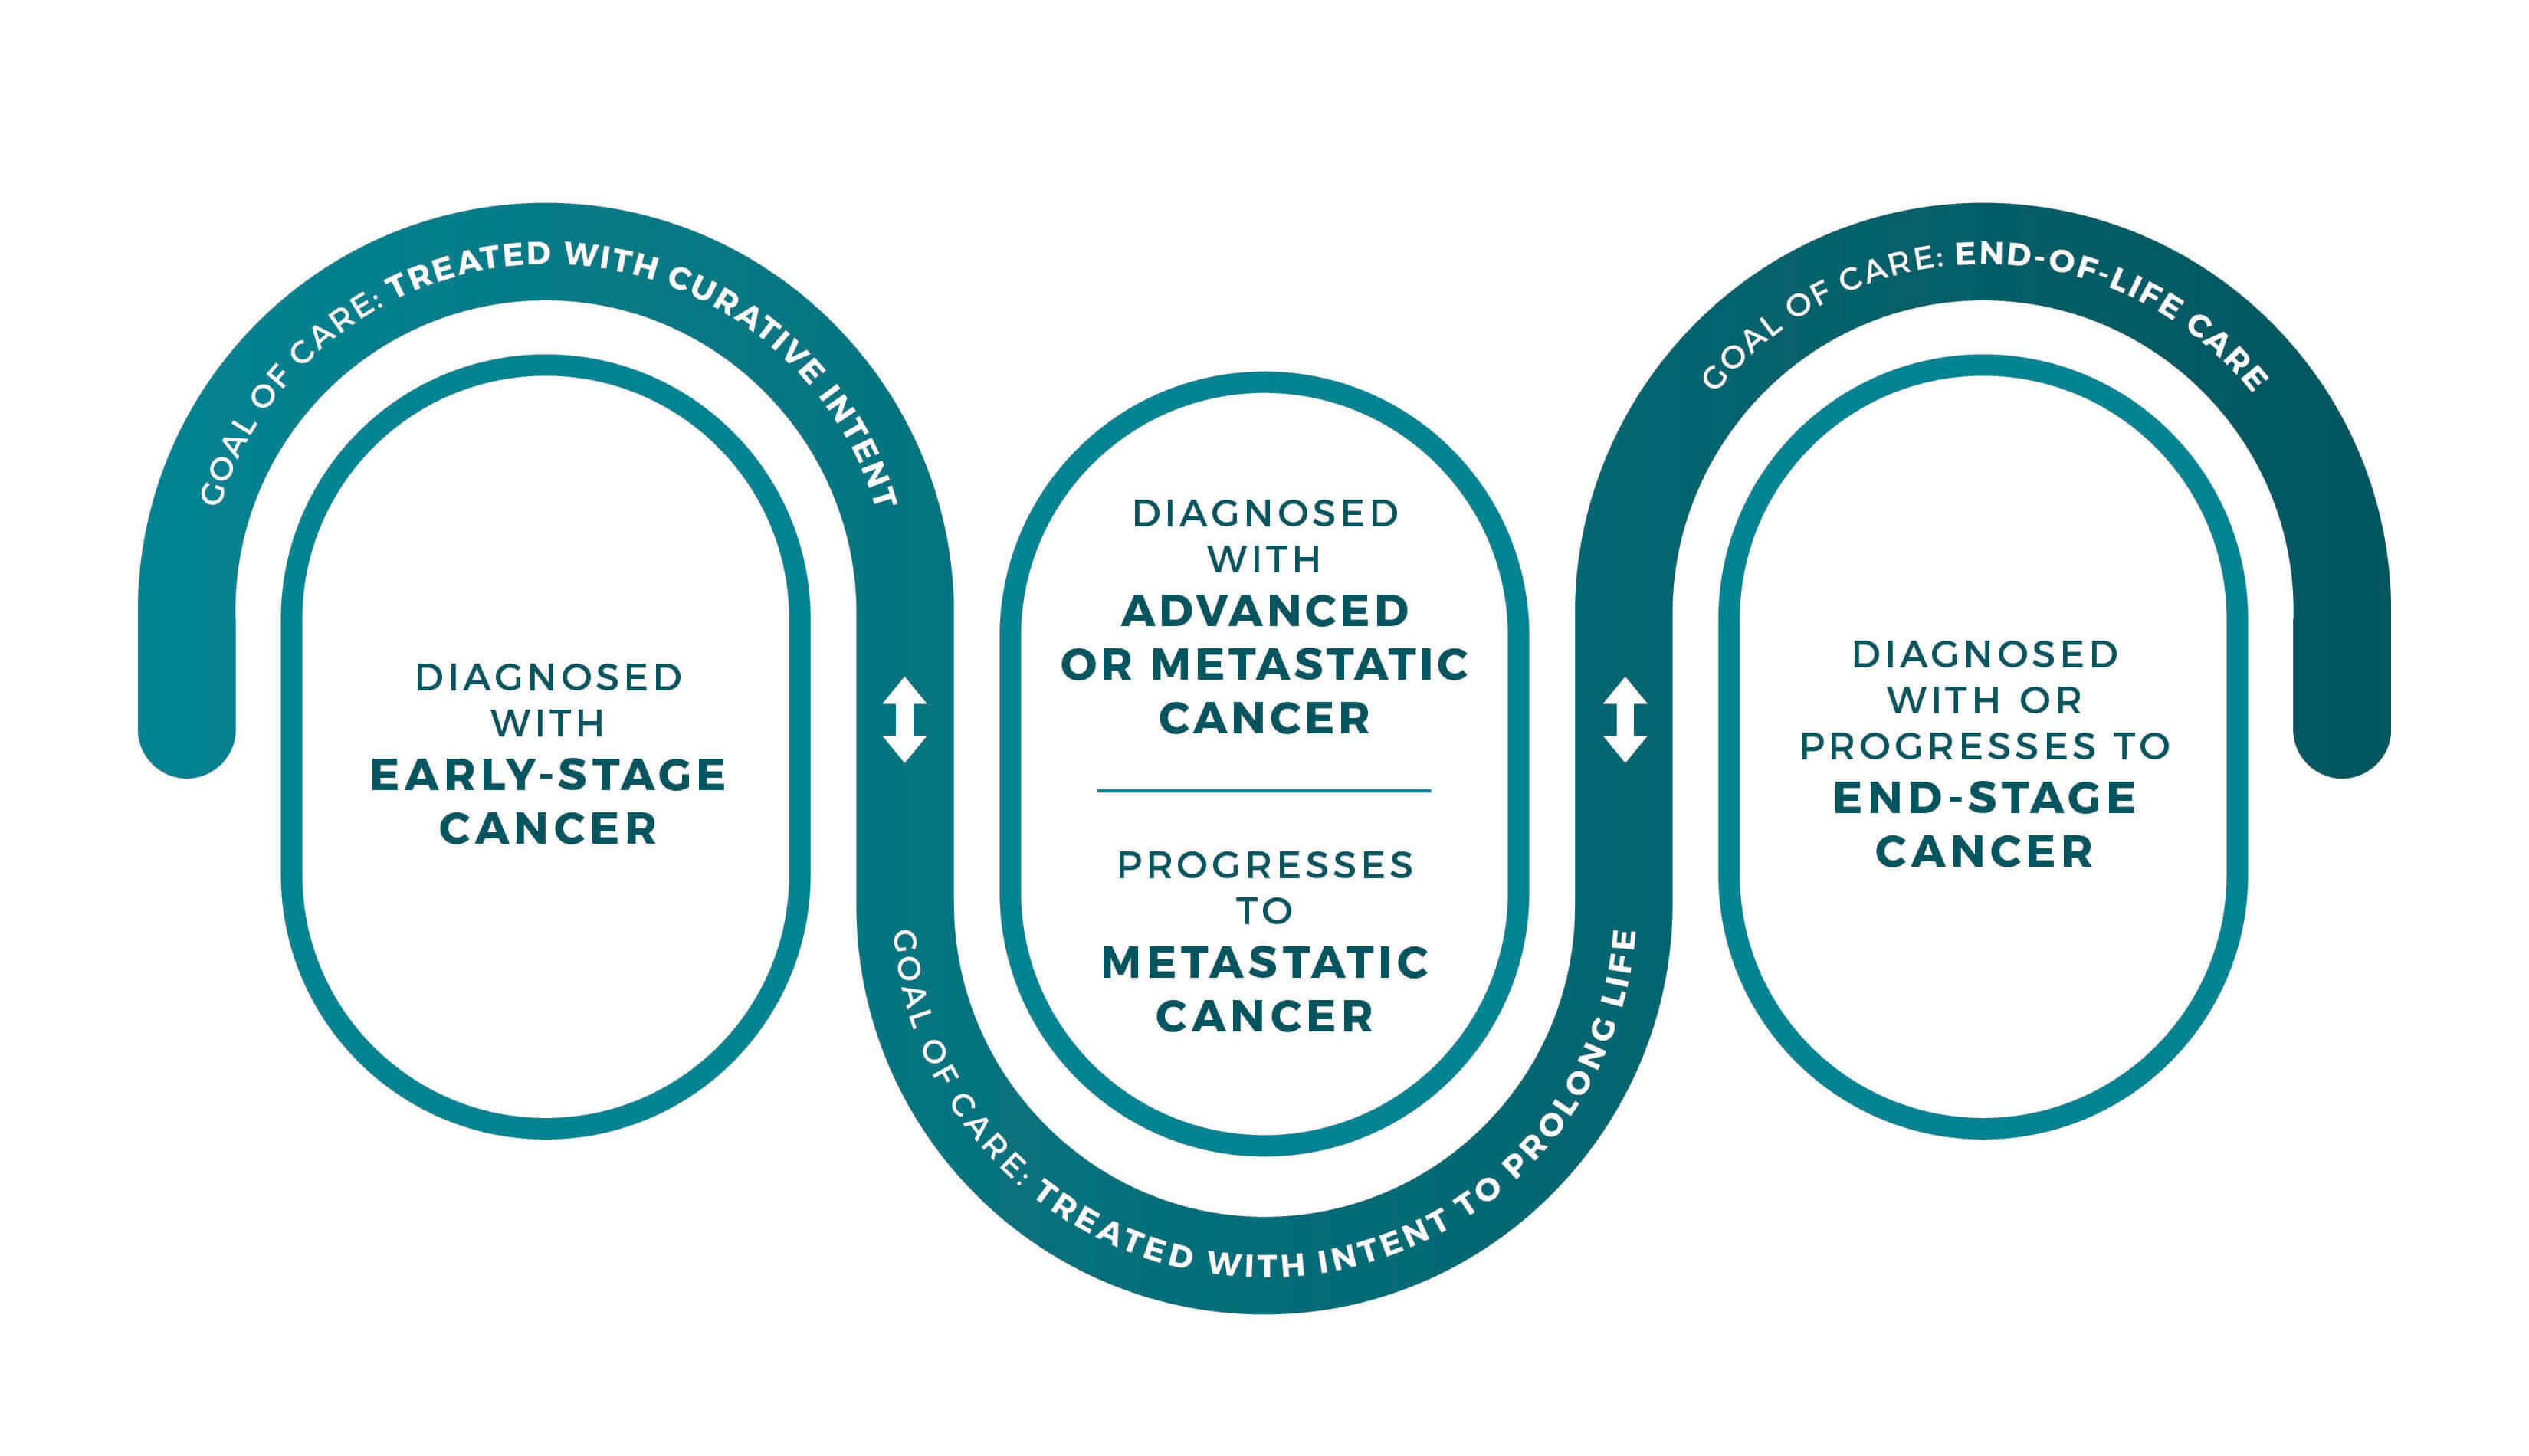 A pathway diagram that highlights the phases of cancer survivorship